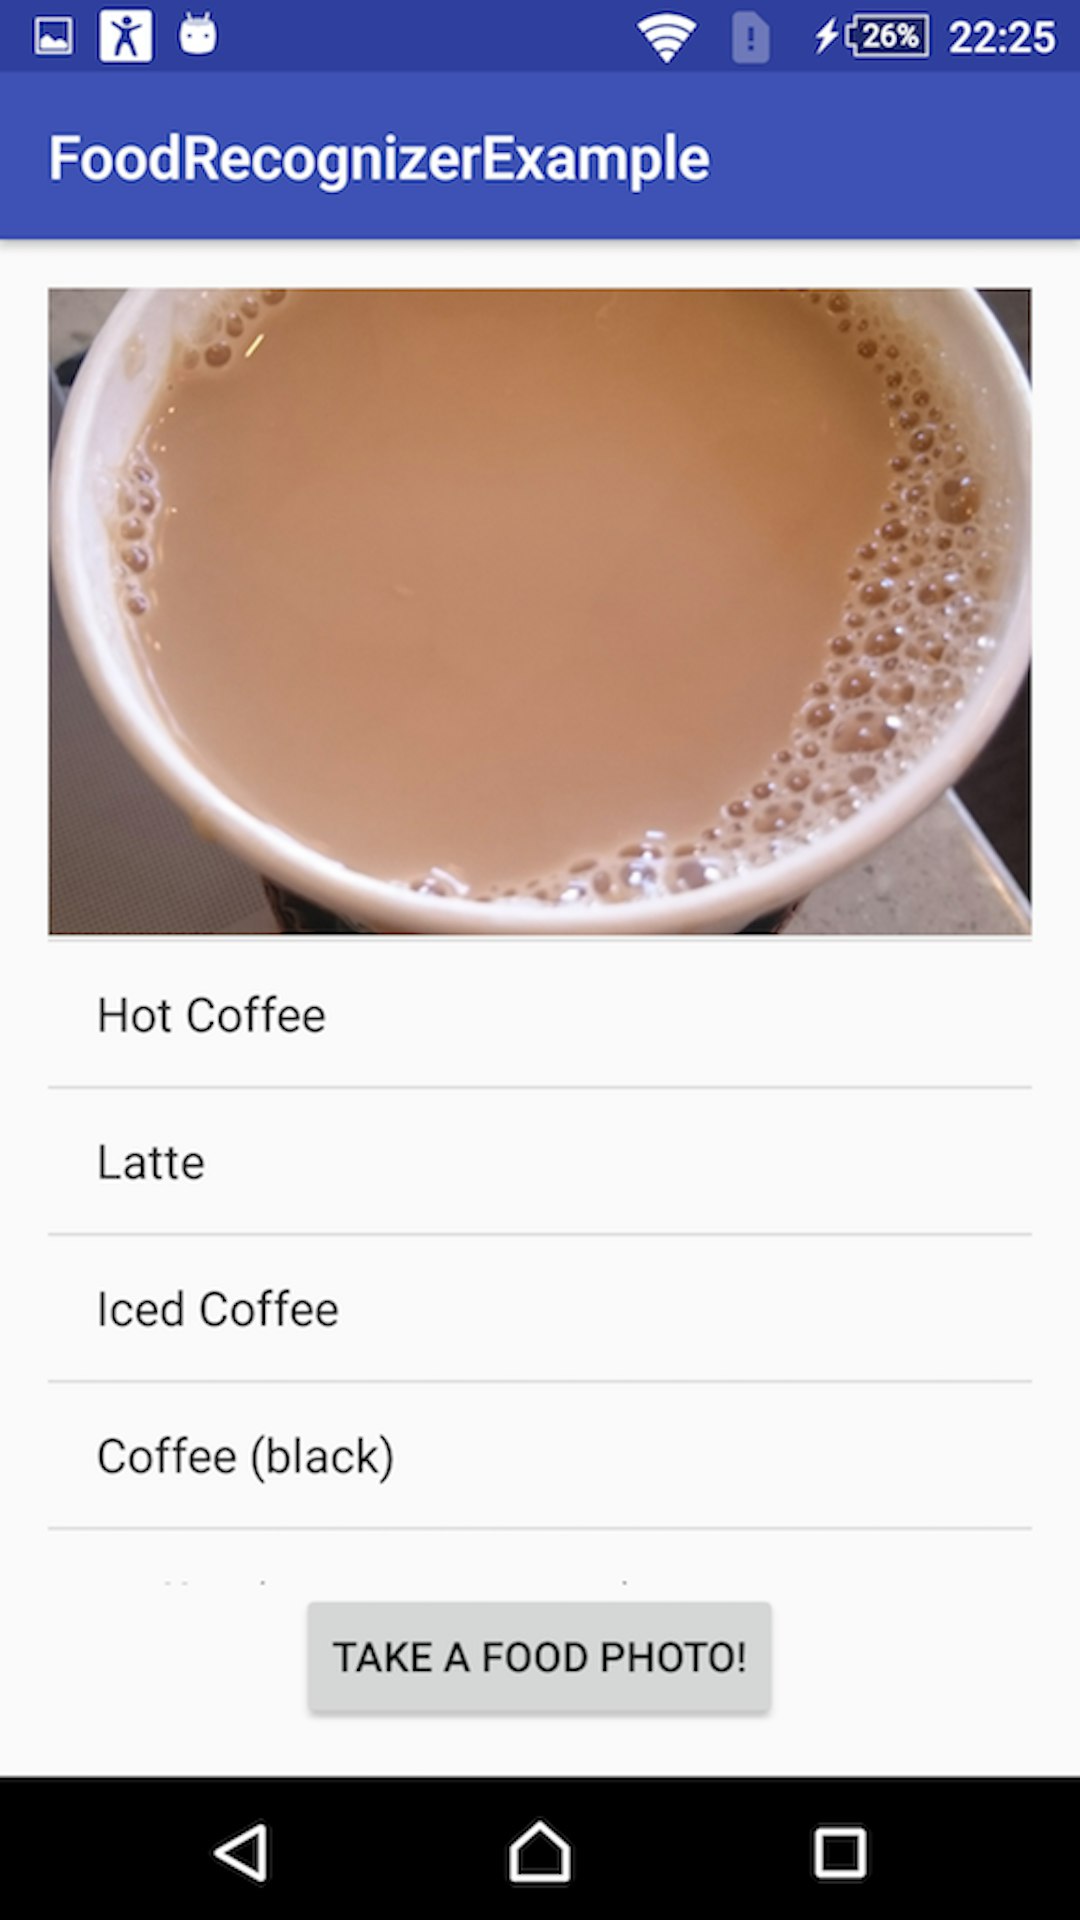 featured image - Machine Learning for Food Recognition with Android Demo